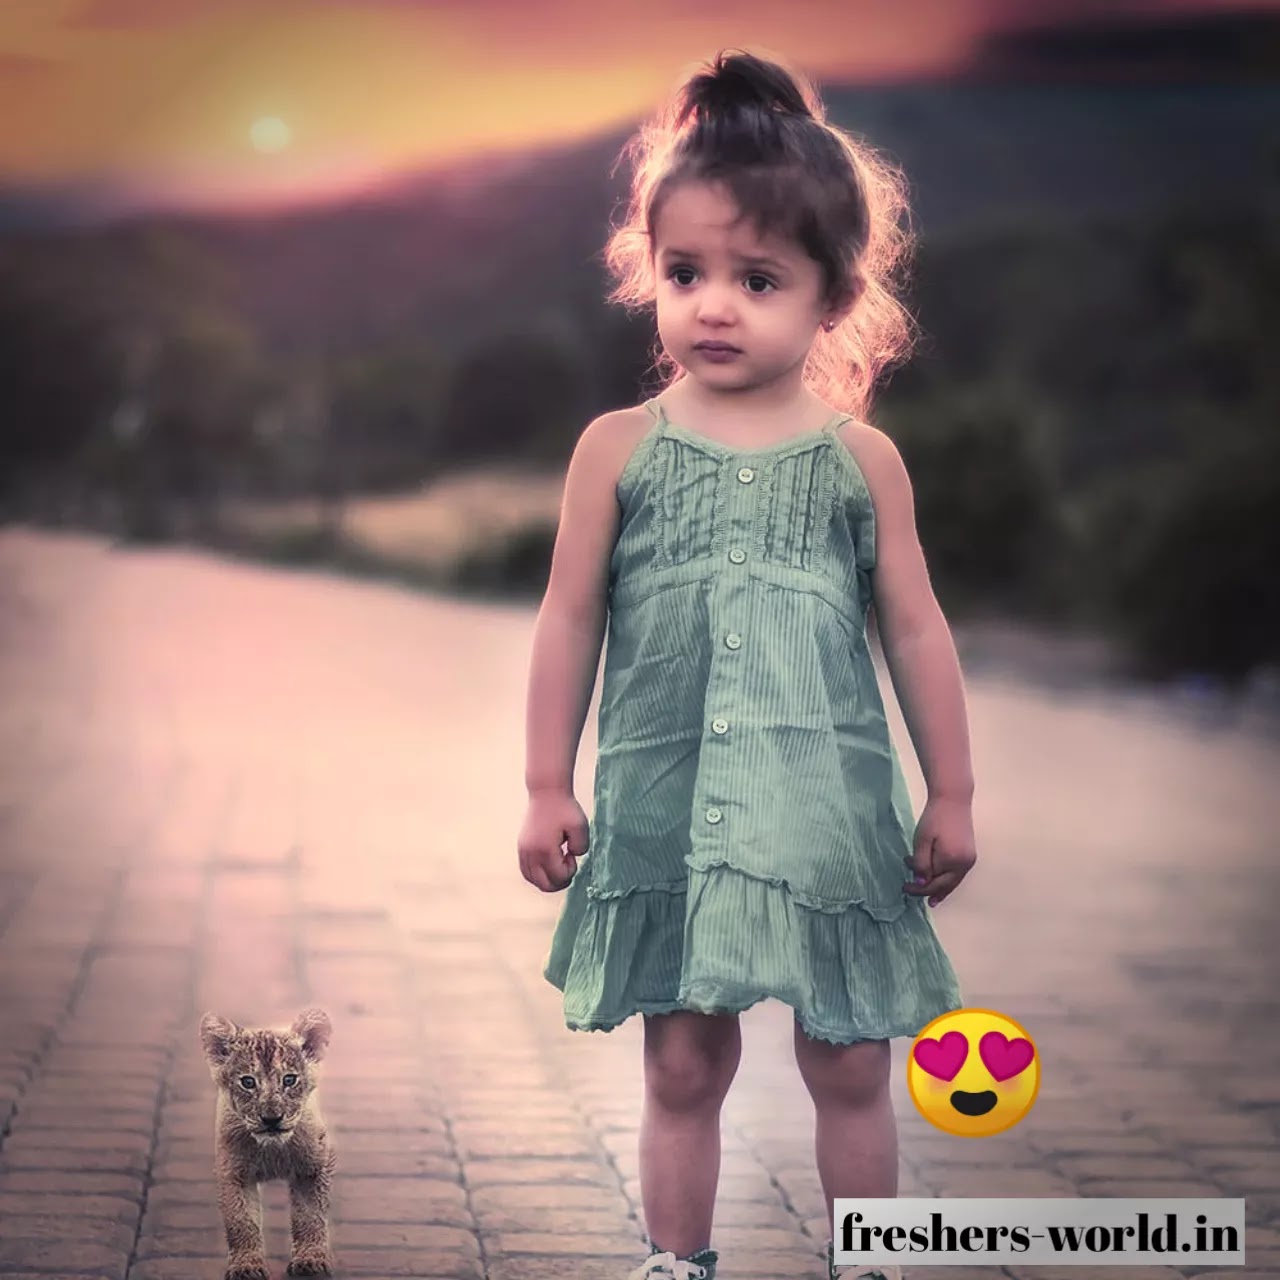 Cute Baby Pic For Whatsapp Dp Download